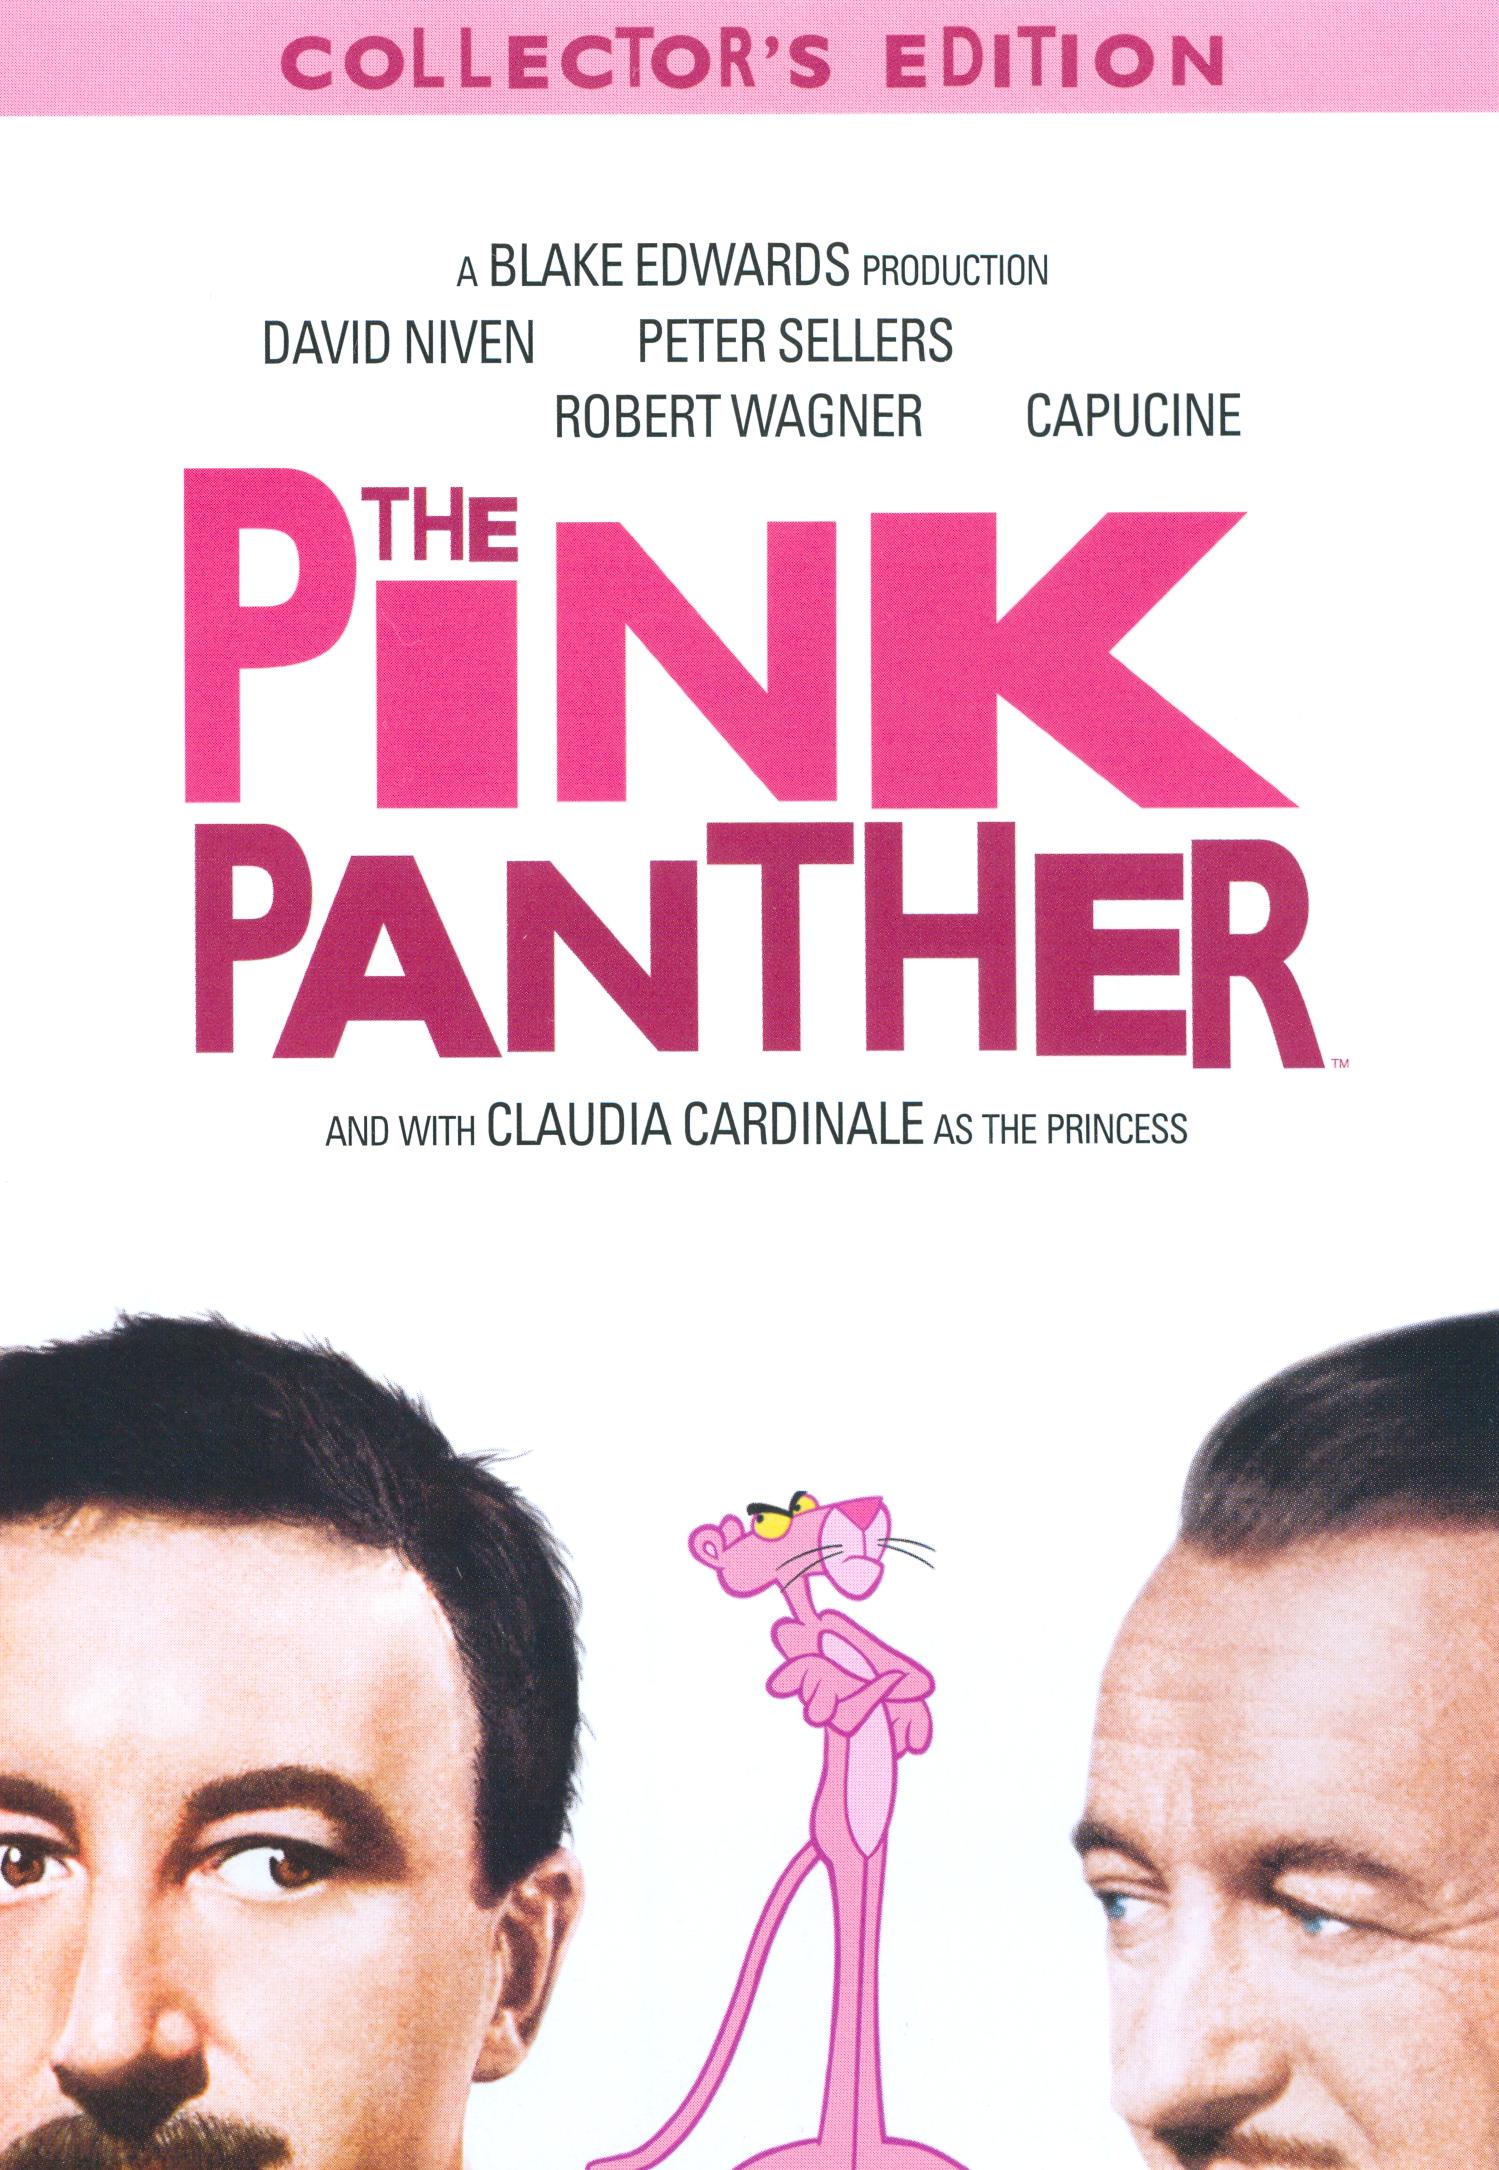 1963, The Pink Panther, MGM And United Artist, Beverly Hills, California US  #pinkpanther (1220)